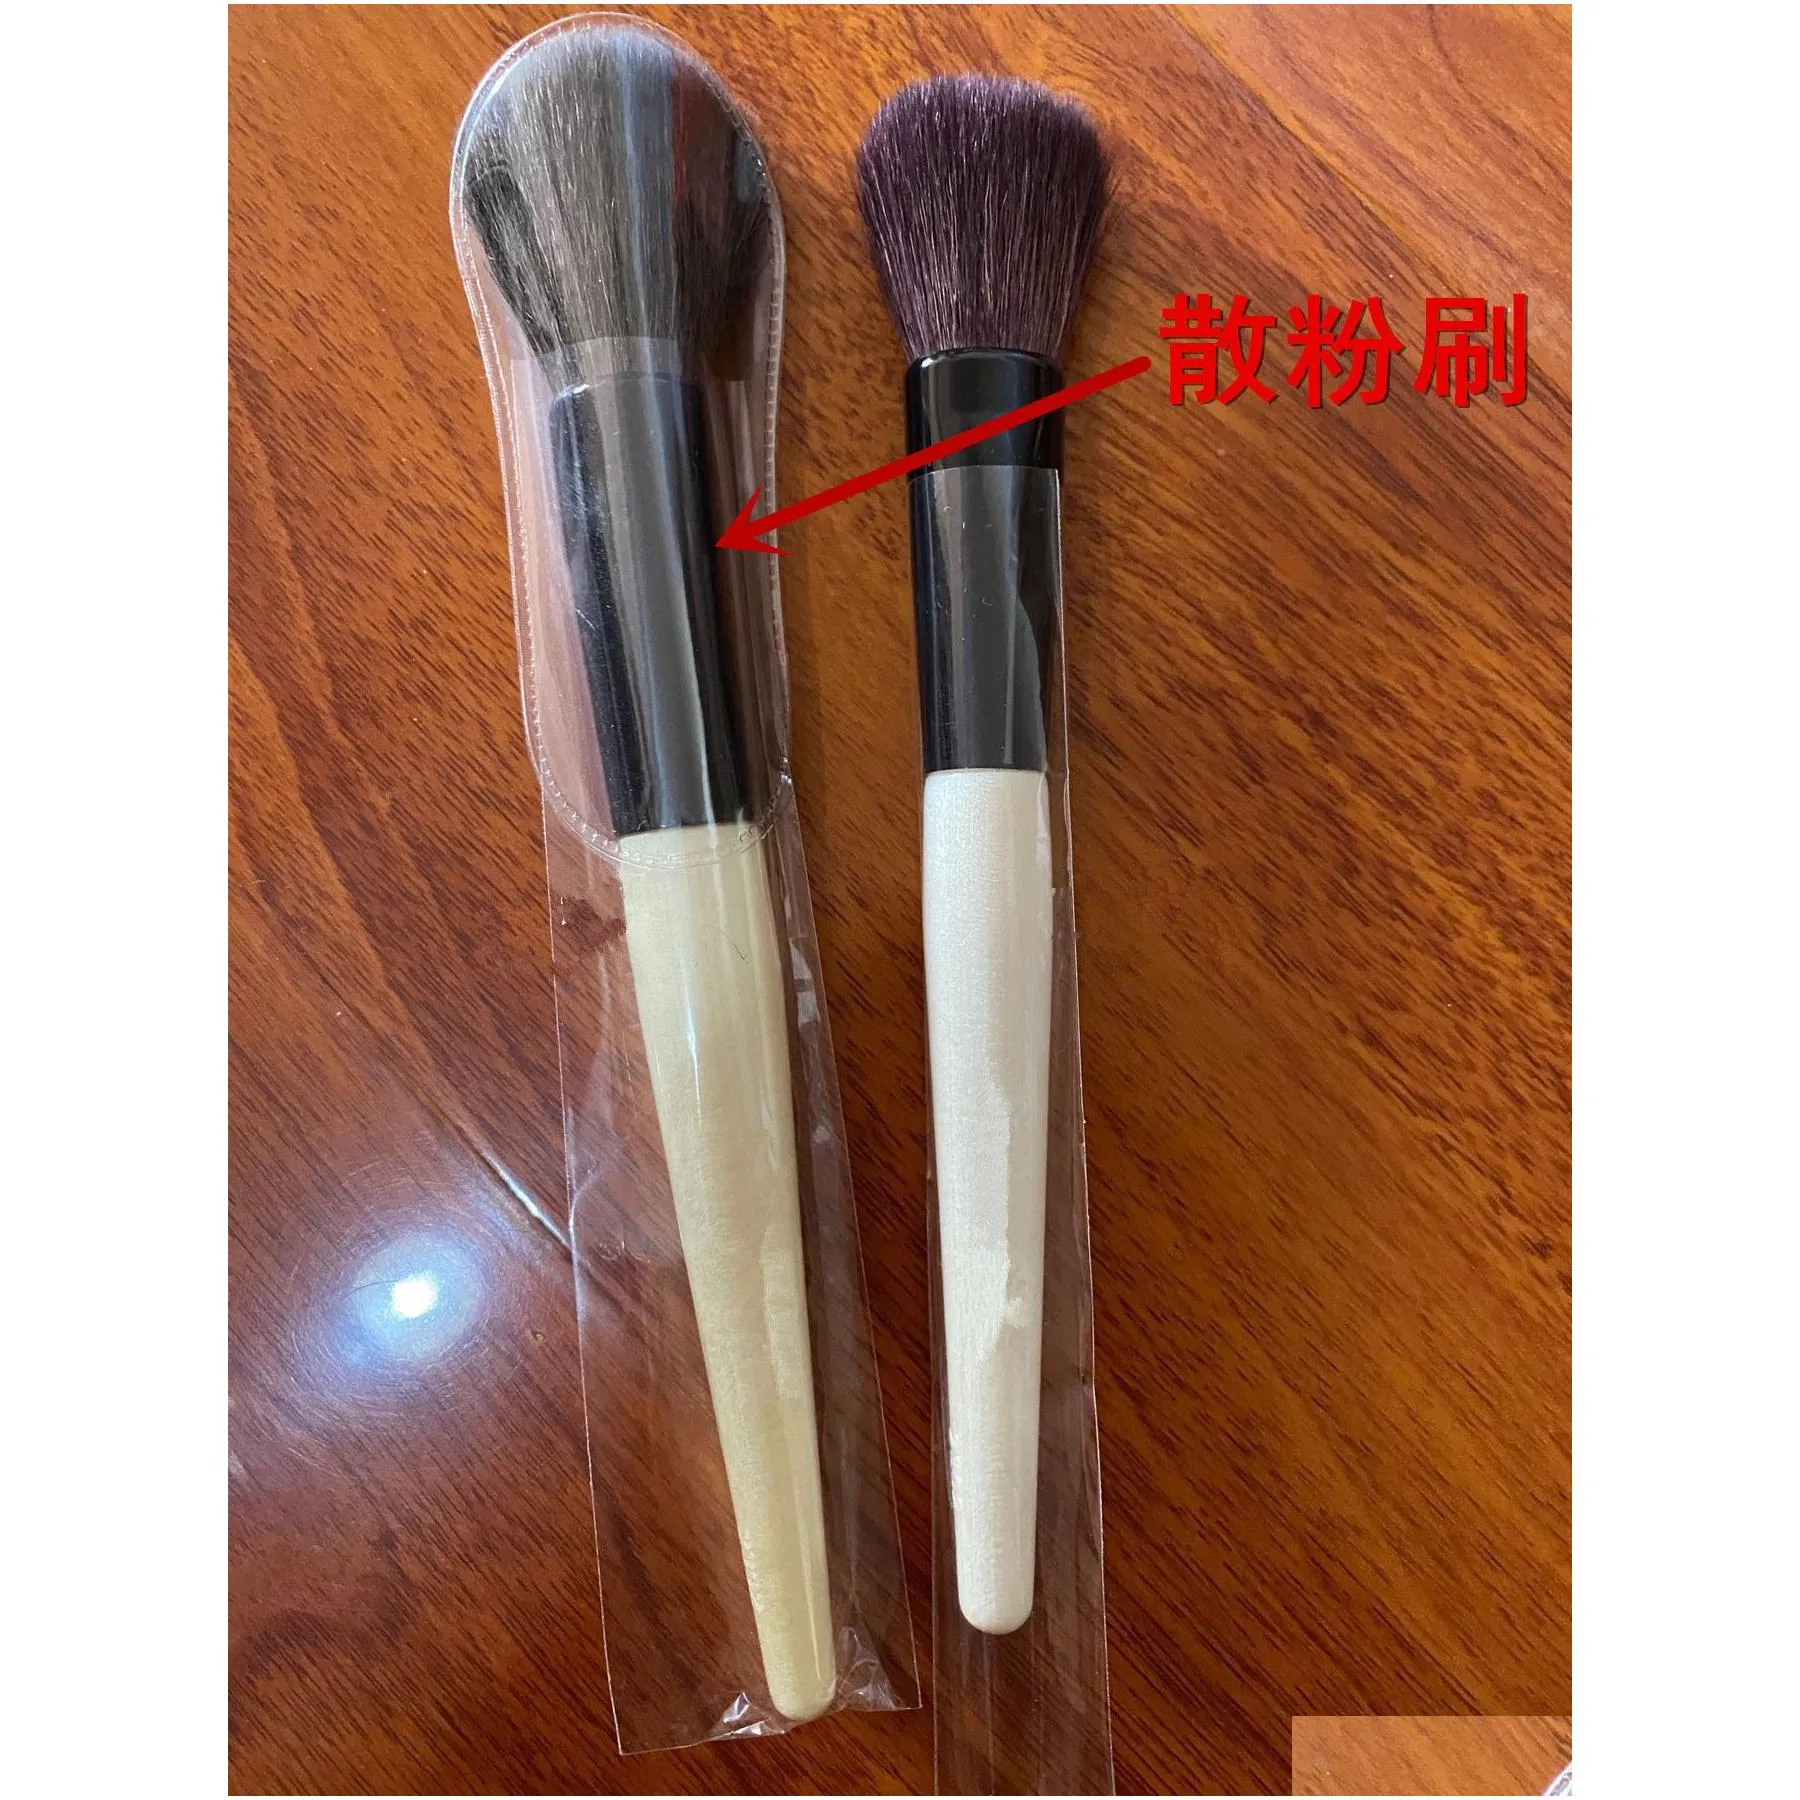 bb-seires brushes bronzer full coverage face blender foundation cream shadow blending touch-up - quality beauty makeup brushes tool